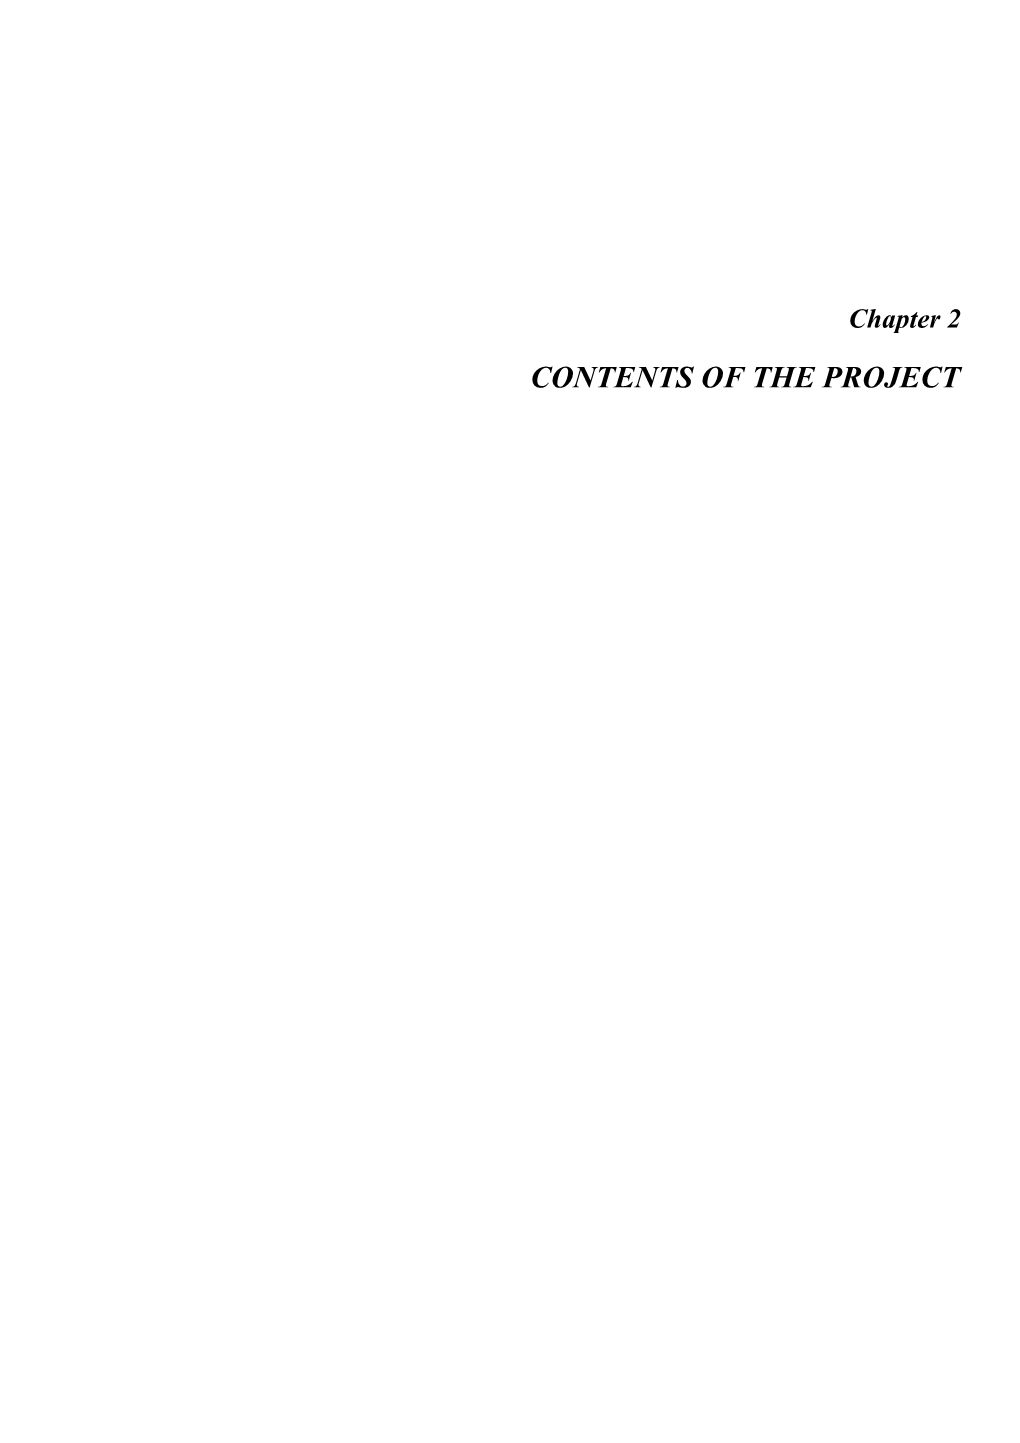 Chapter 2 CONTENTS of the PROJECT